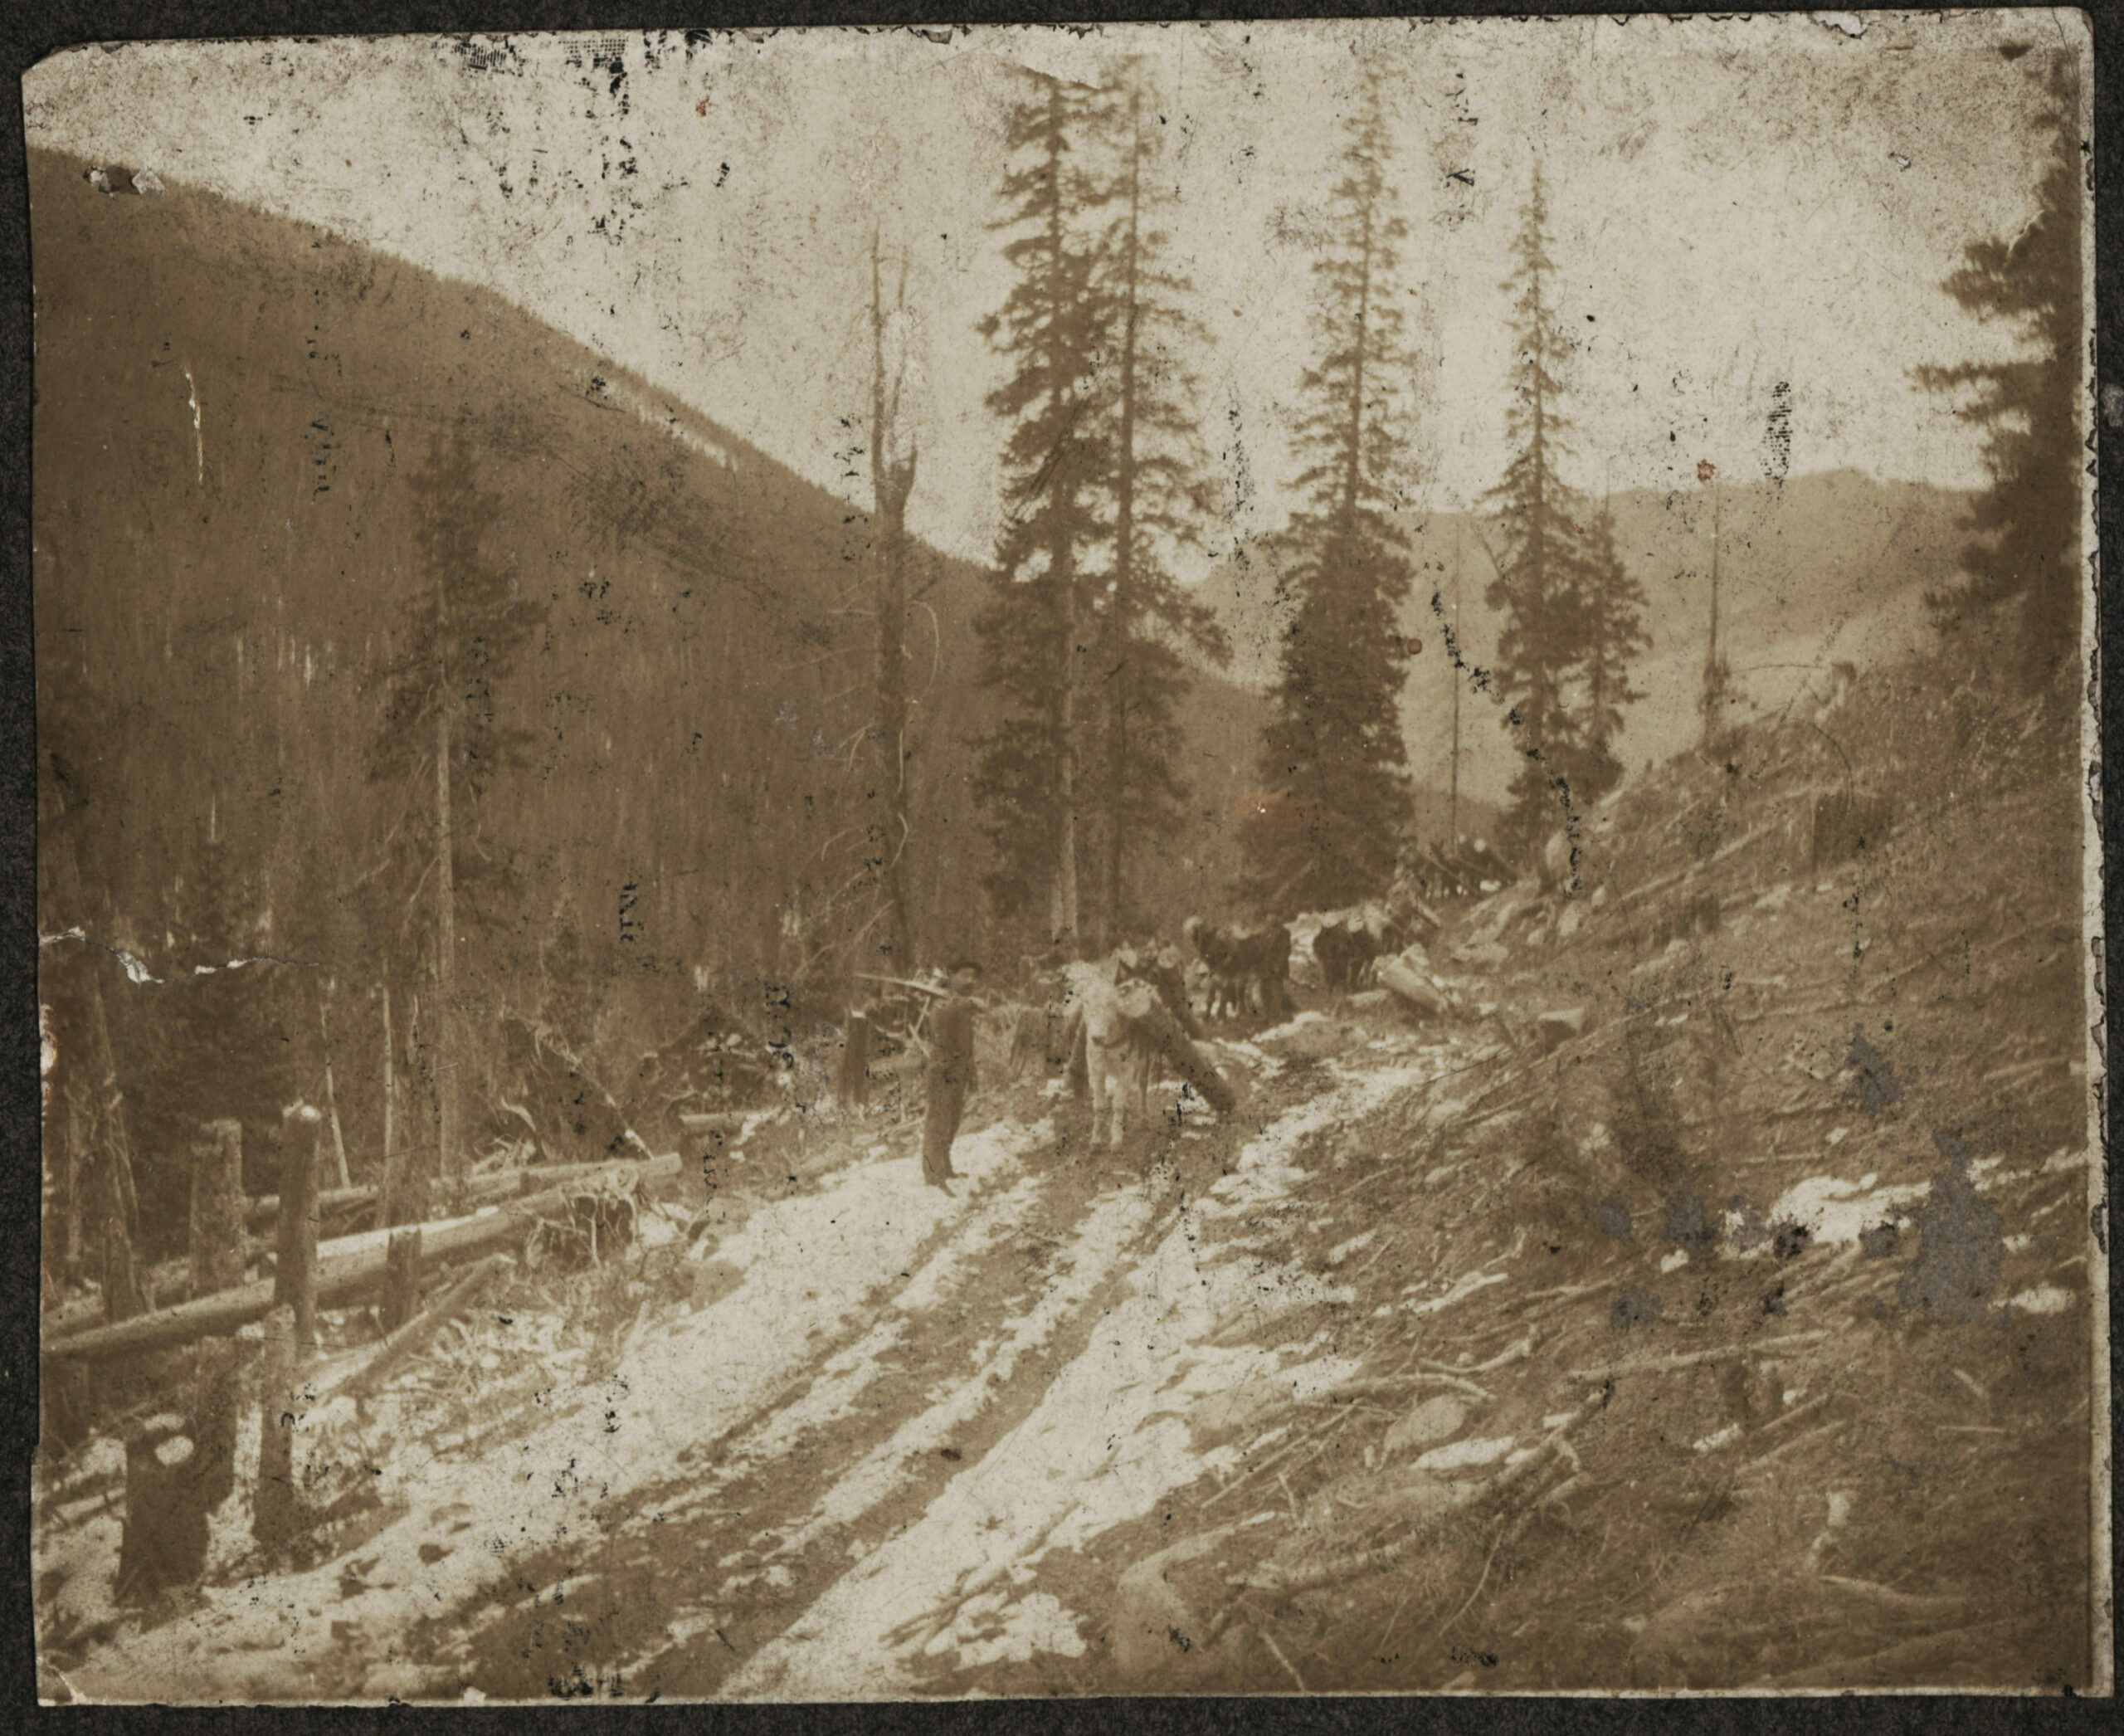 A burro train hauls timber on Old Monarch Pass.